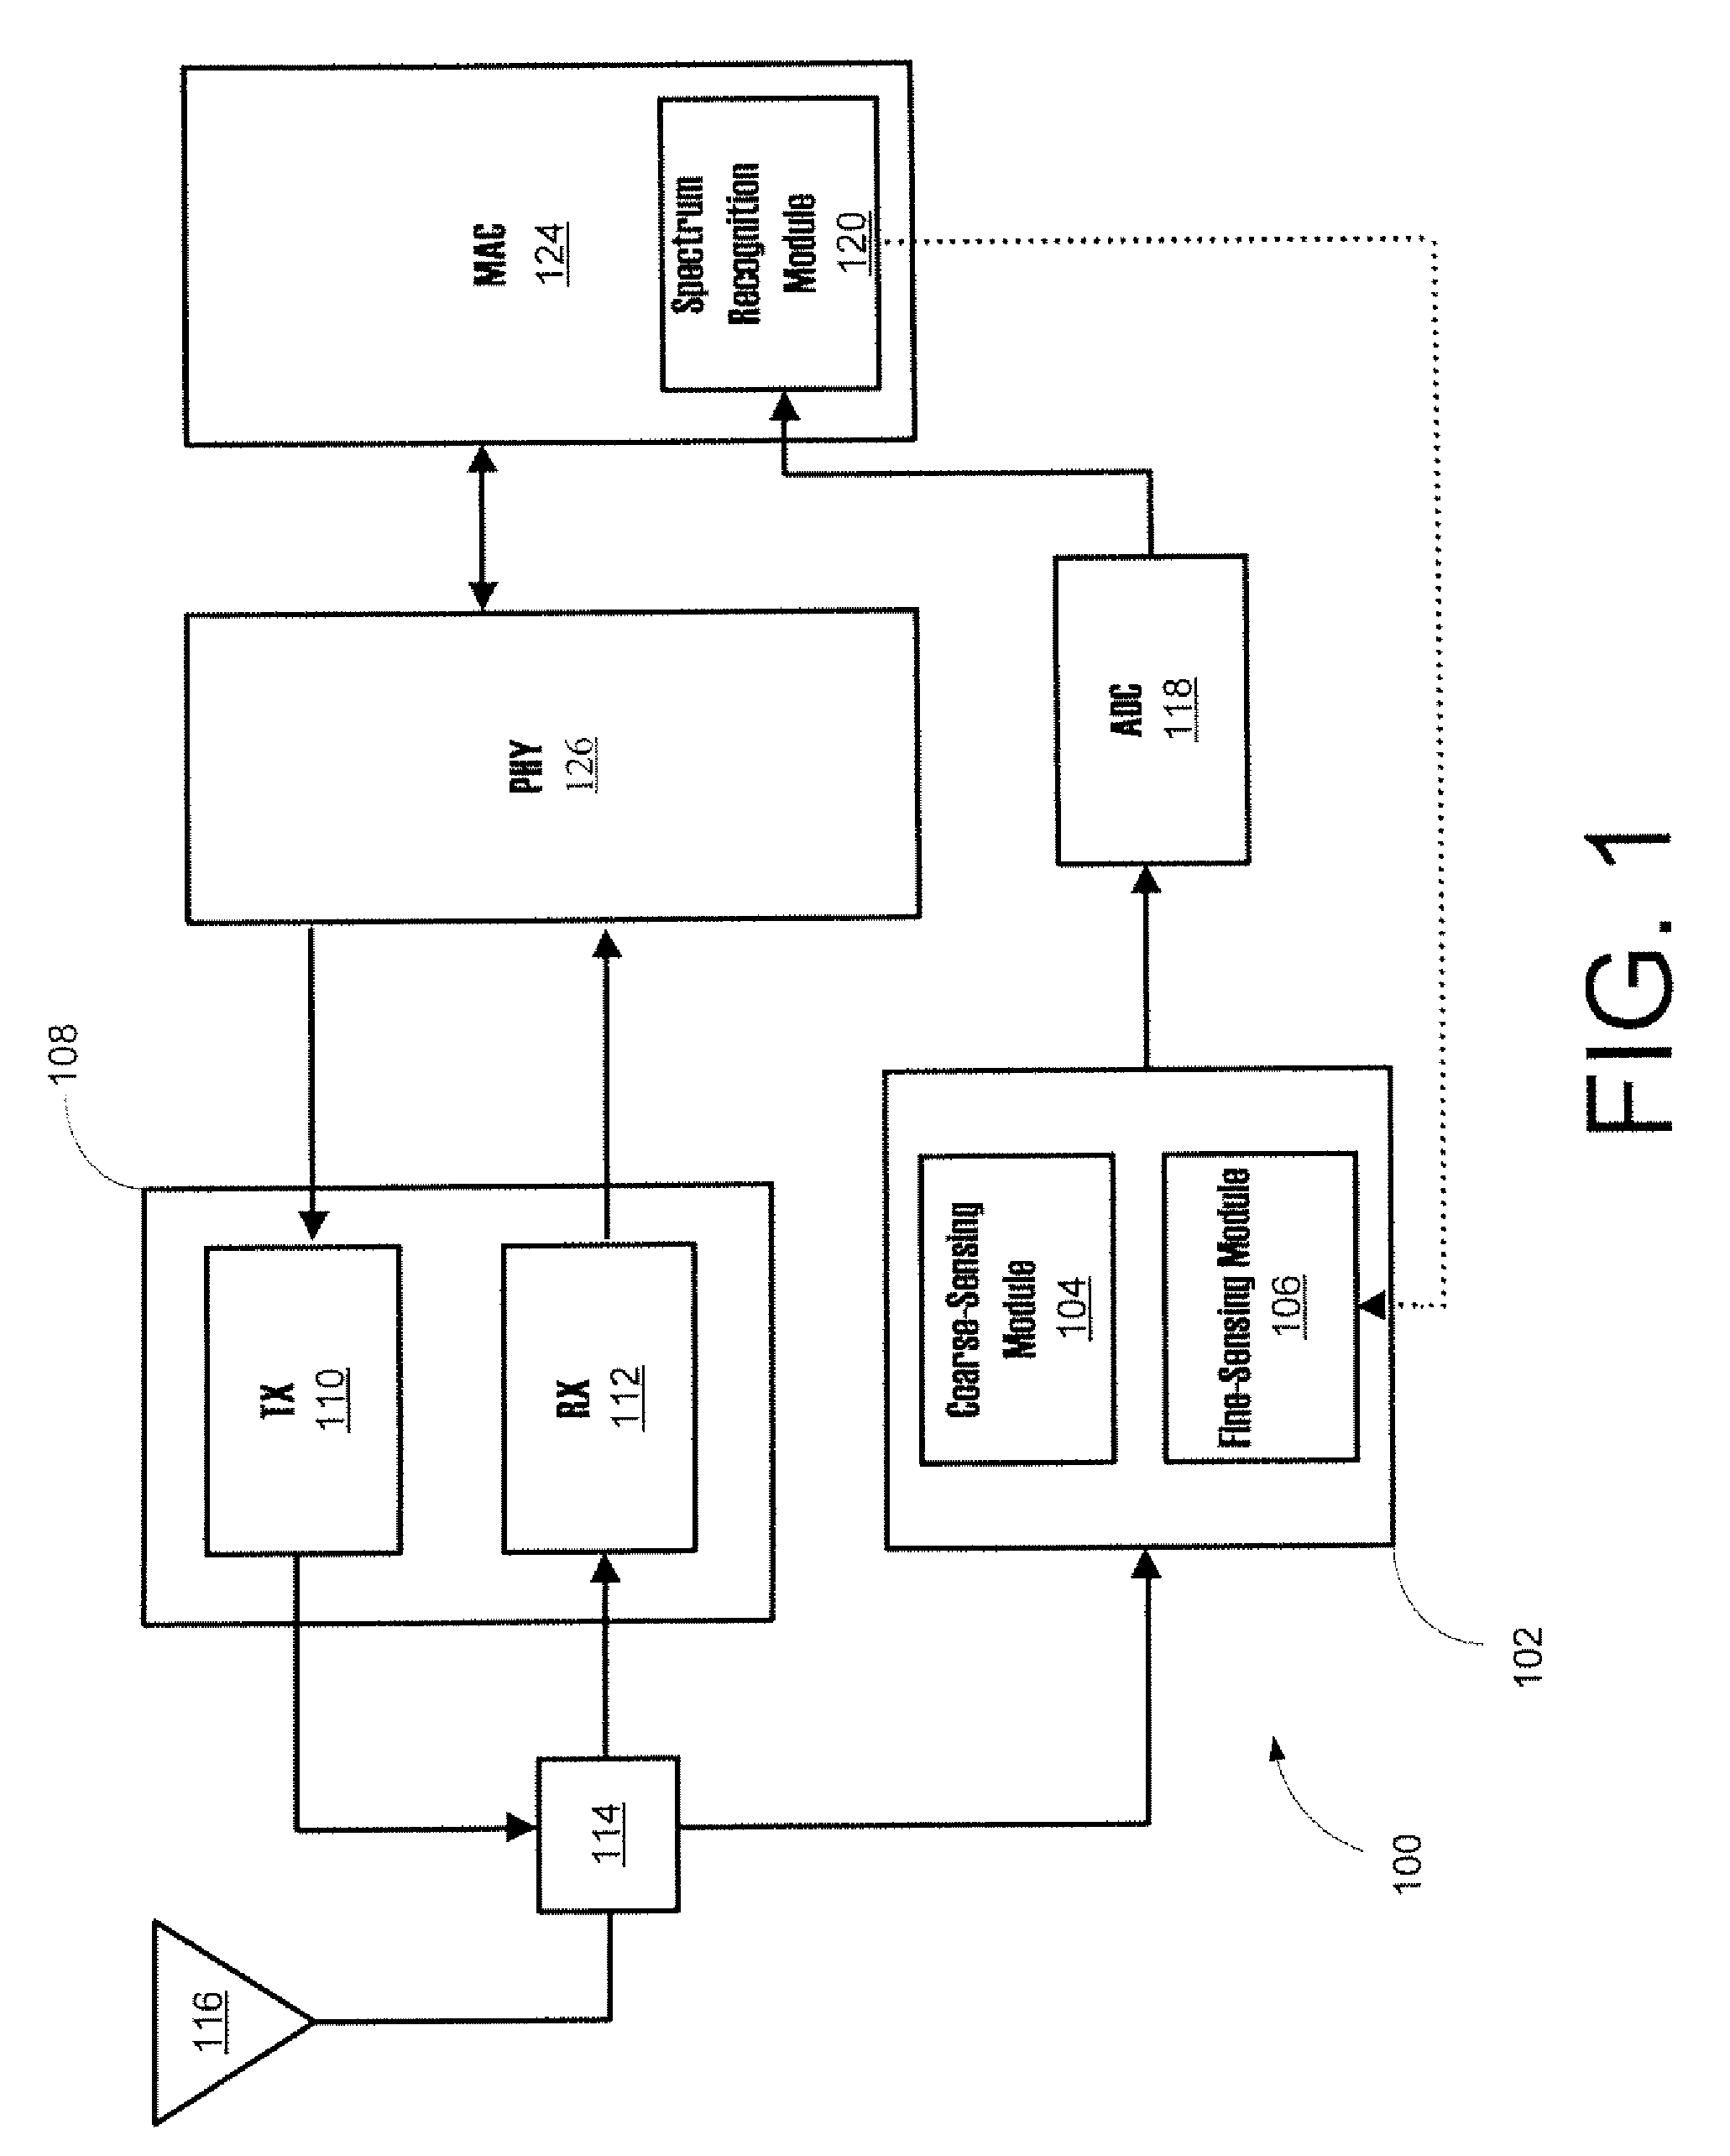 Systems, Methods, and Apparatuses for Fine-Sensing Modules